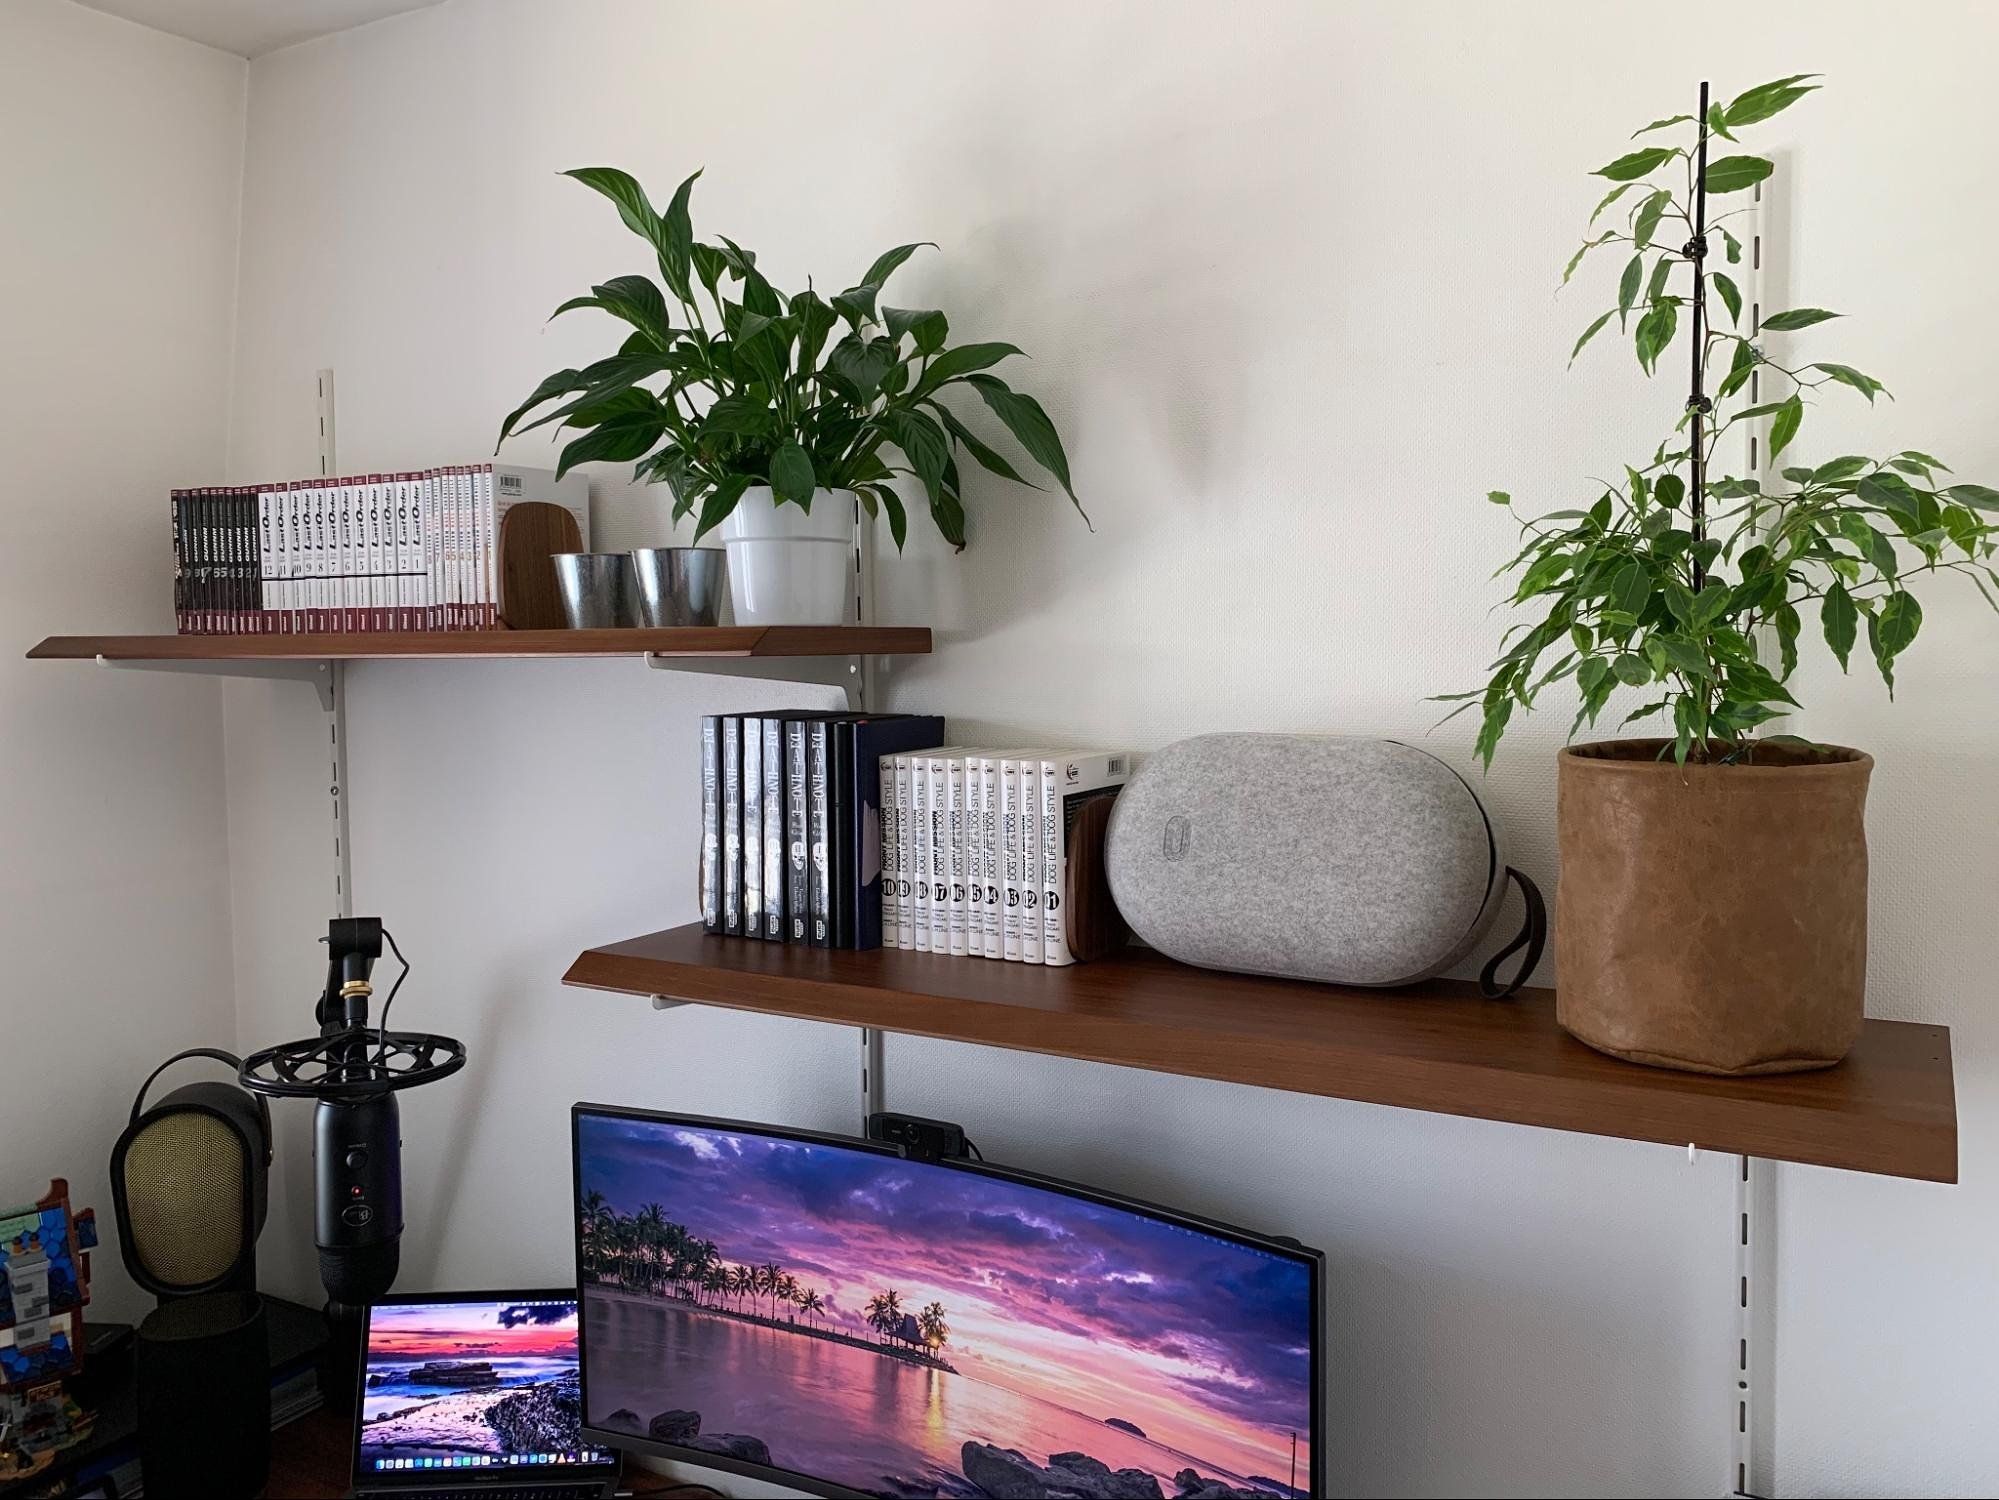 Walnut shelves from a French store called AM-PM and some house plants & books